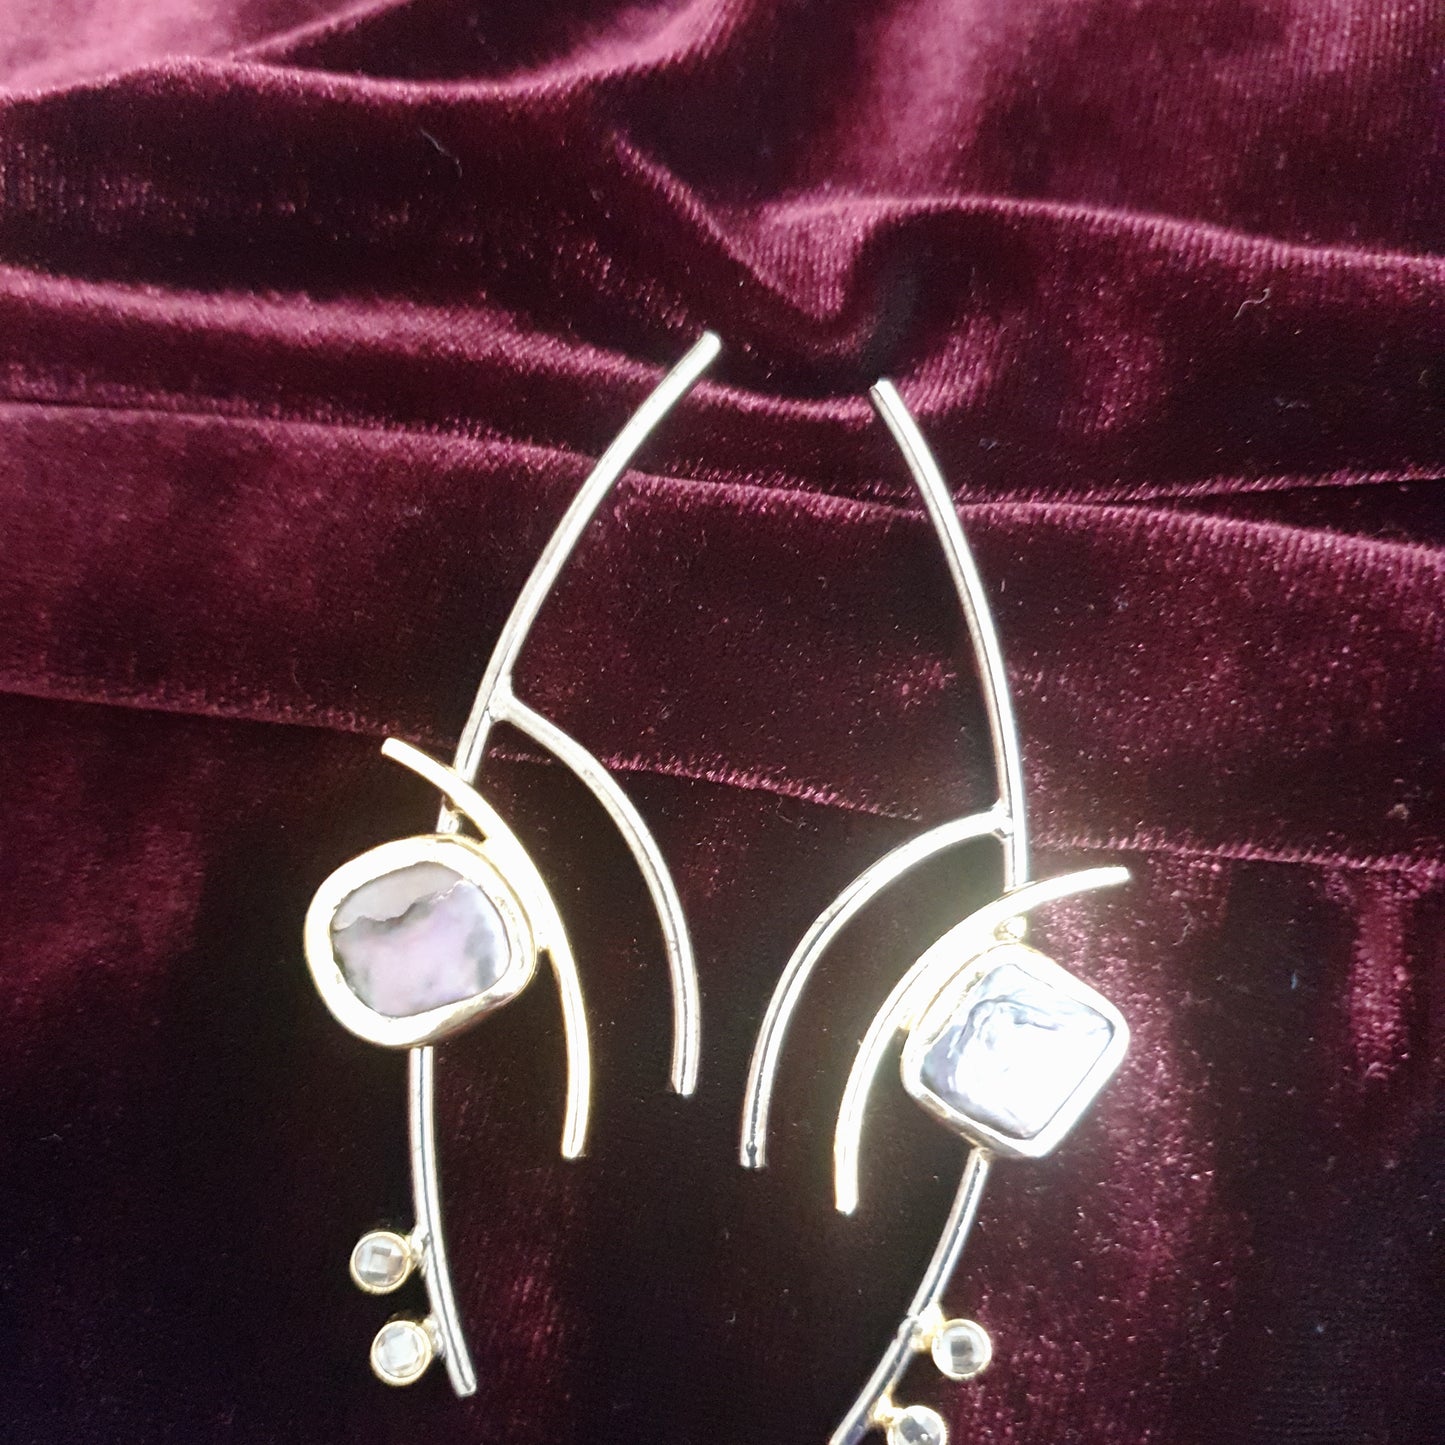 The Abstract Earrings with uncut stone